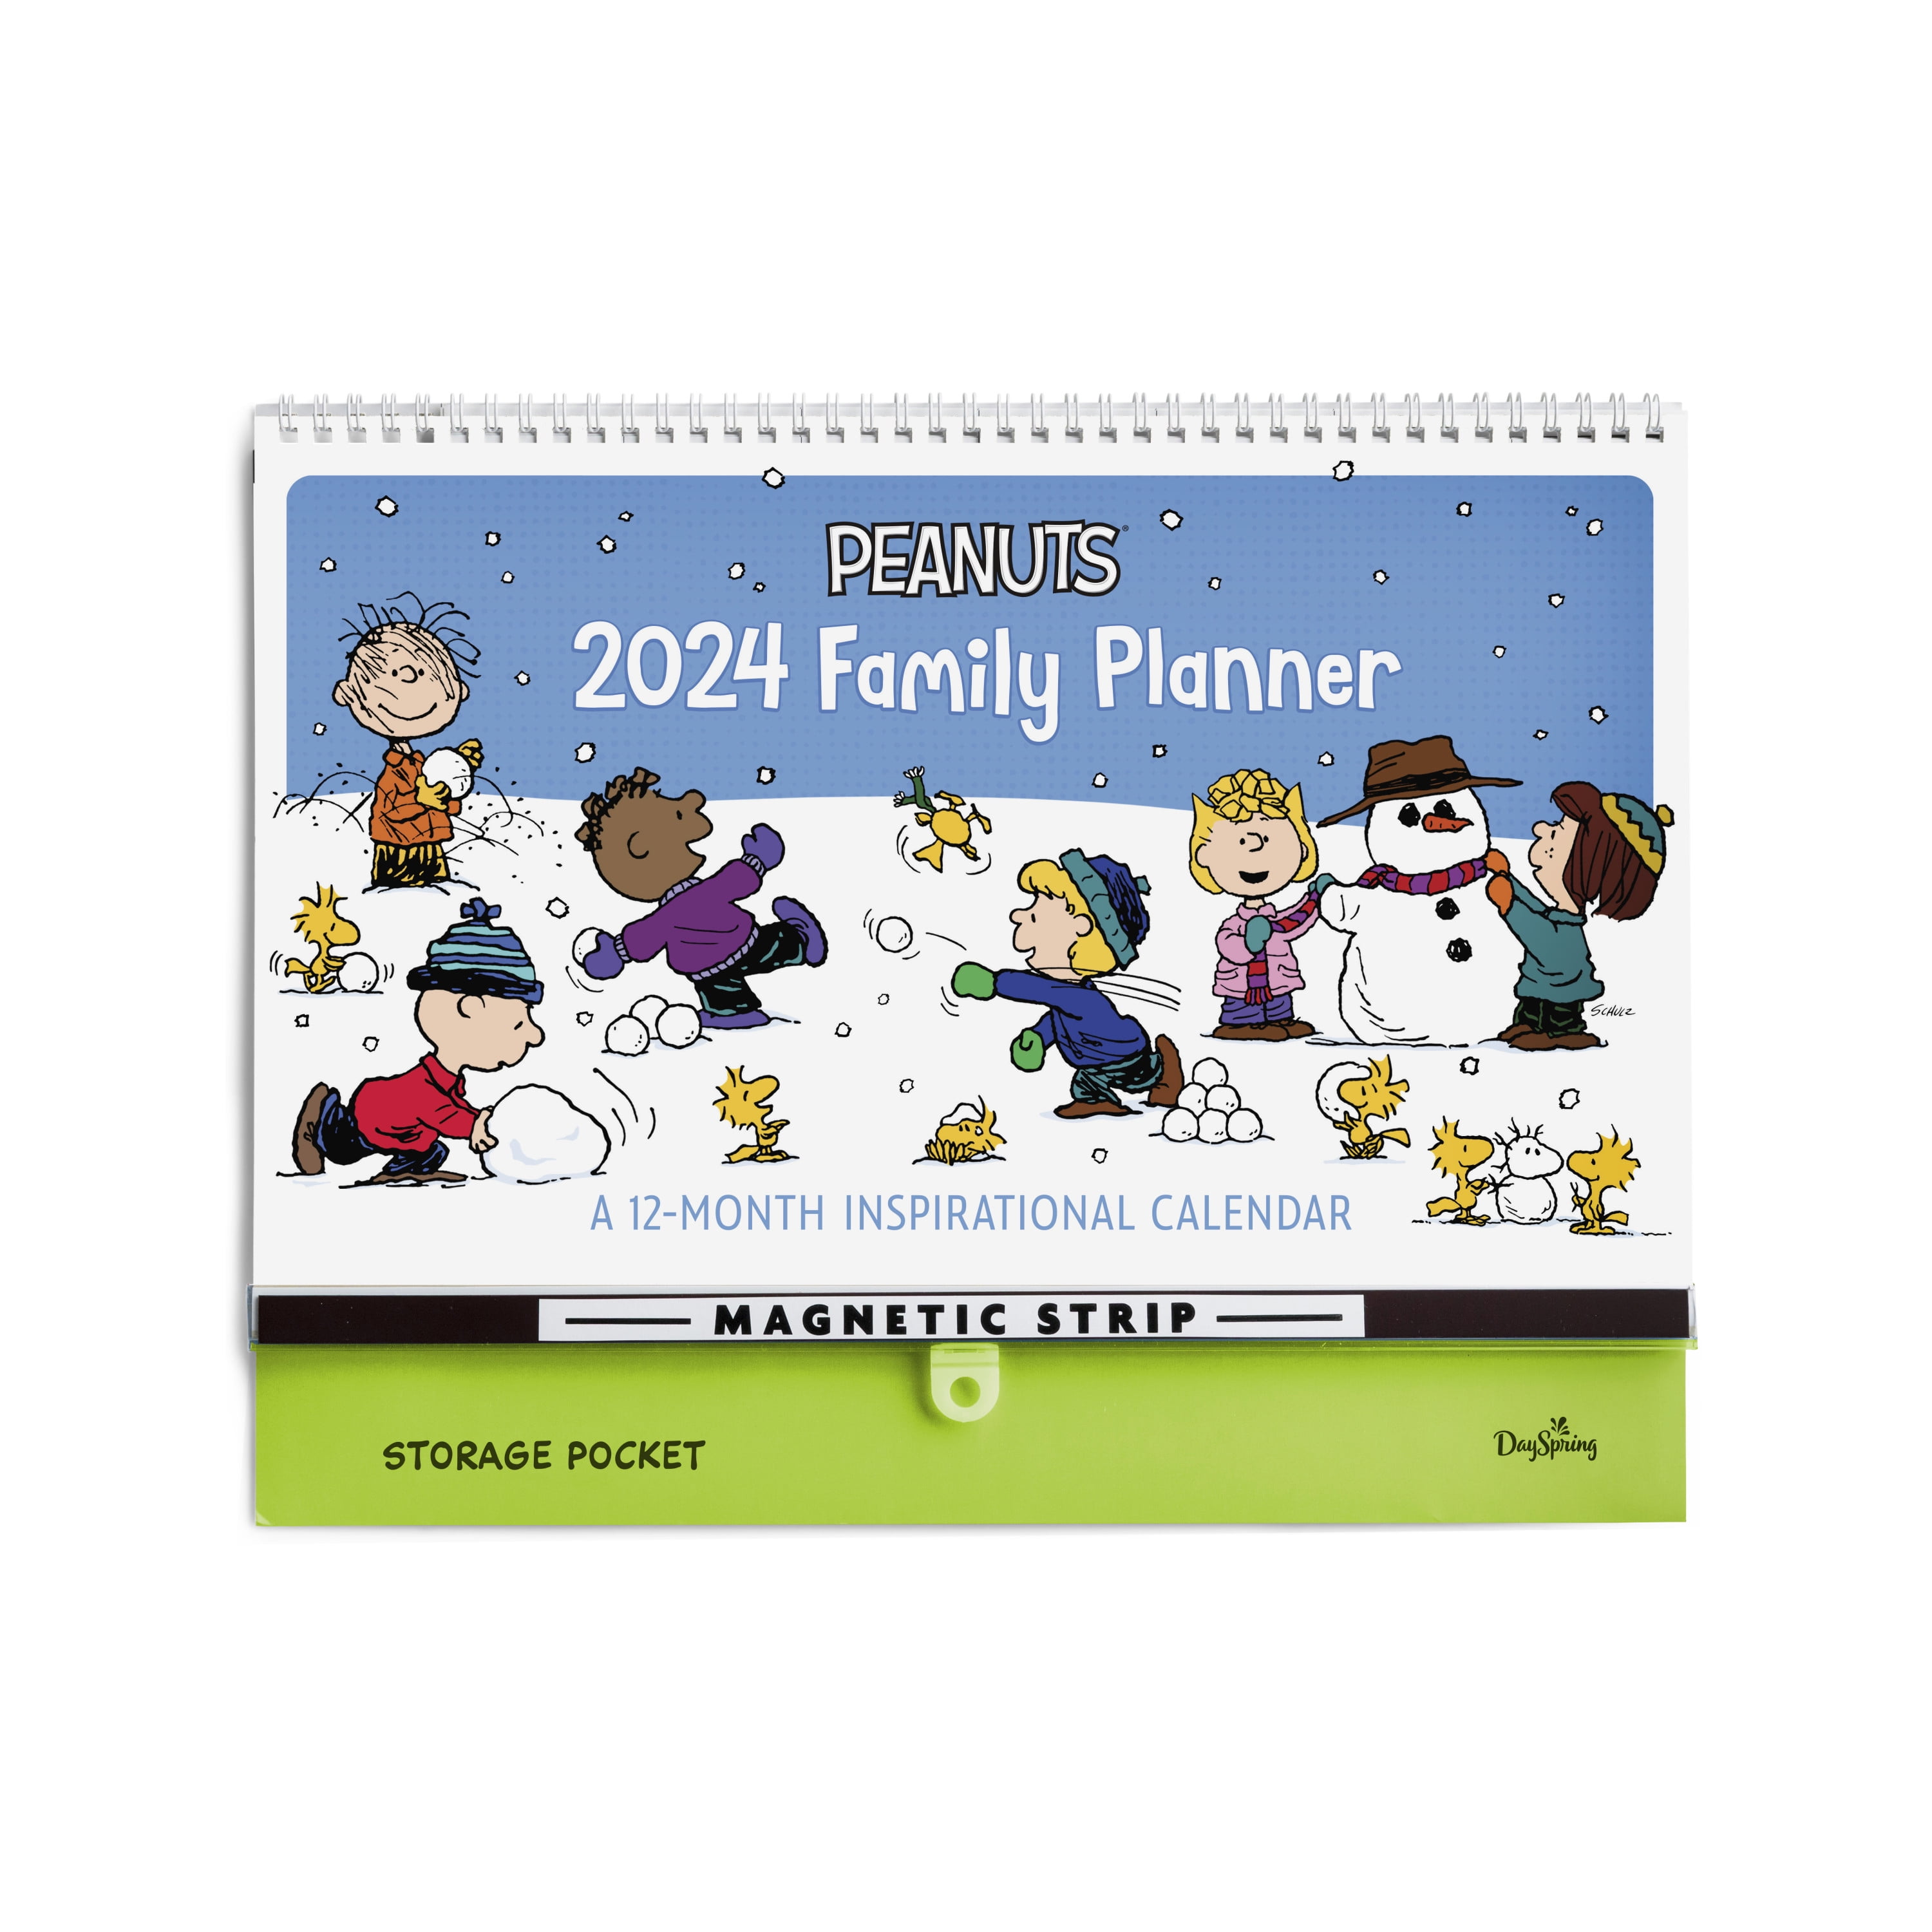 DaySpring Peanuts 2024 Family Planner A 12Month Inspirational